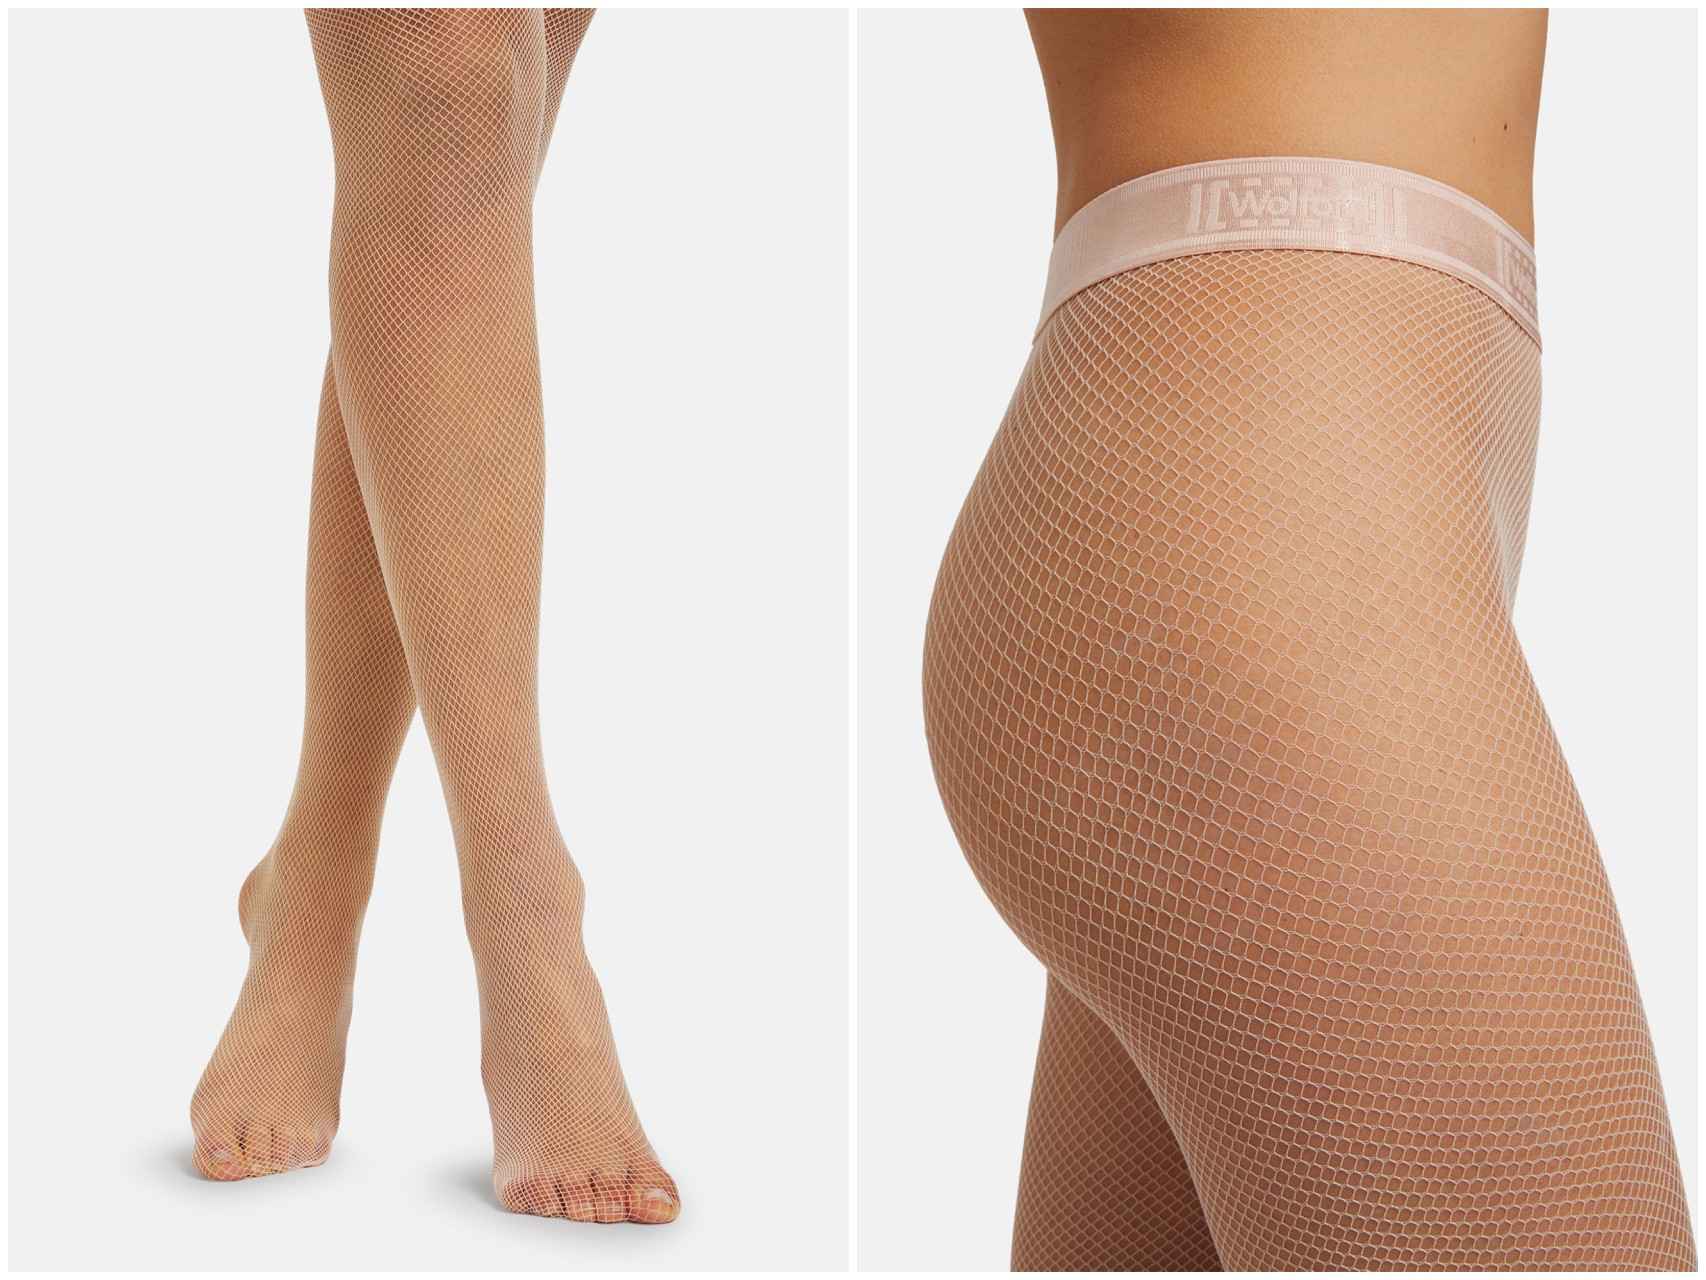 Wolford brand carriers, which Beyoncé uses at her concerts.